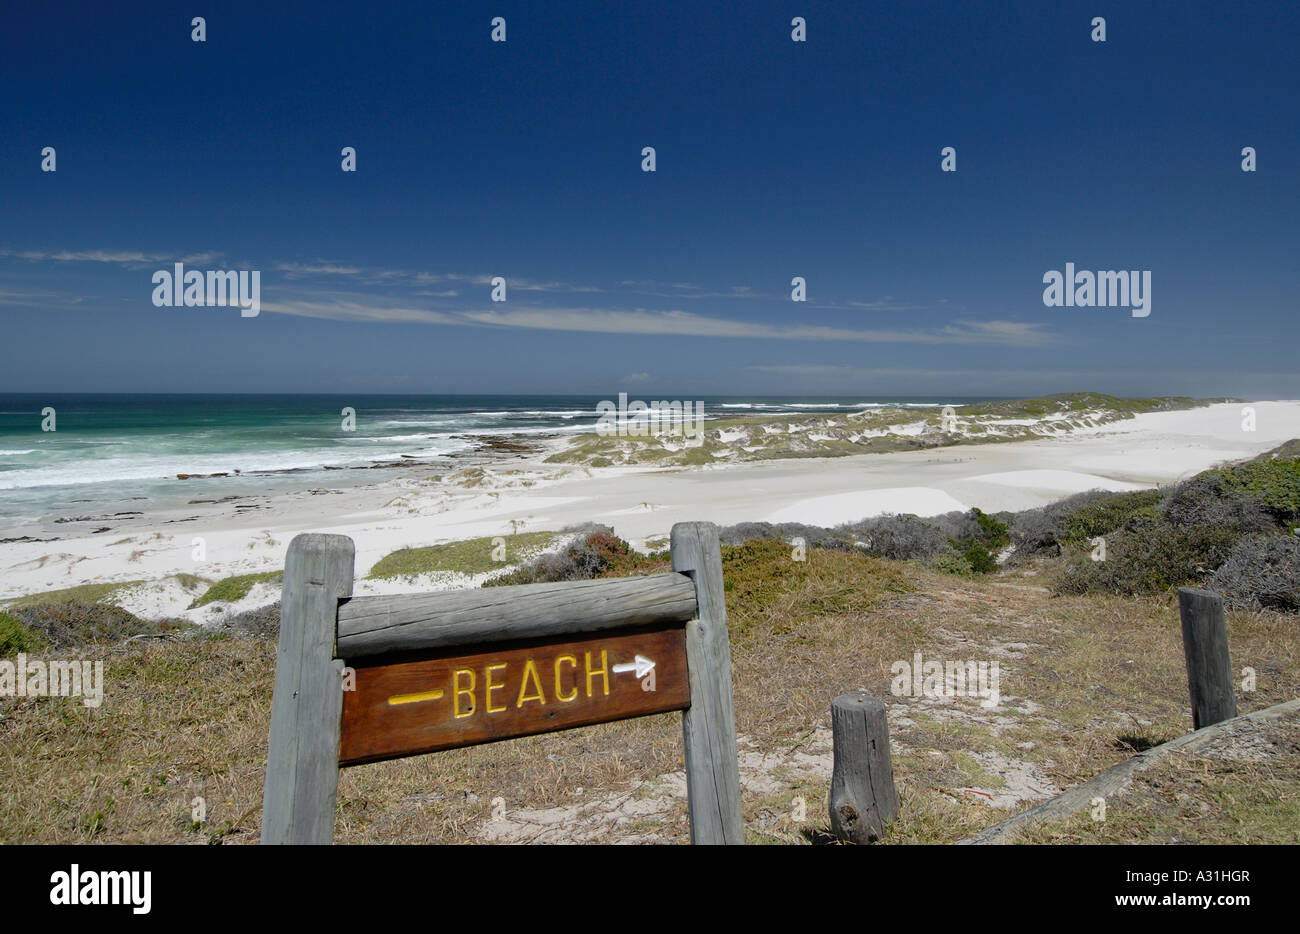 A wooden sign saying Beach pointing to an expanse of silver sand and blue ocean with no people present Stock Photo